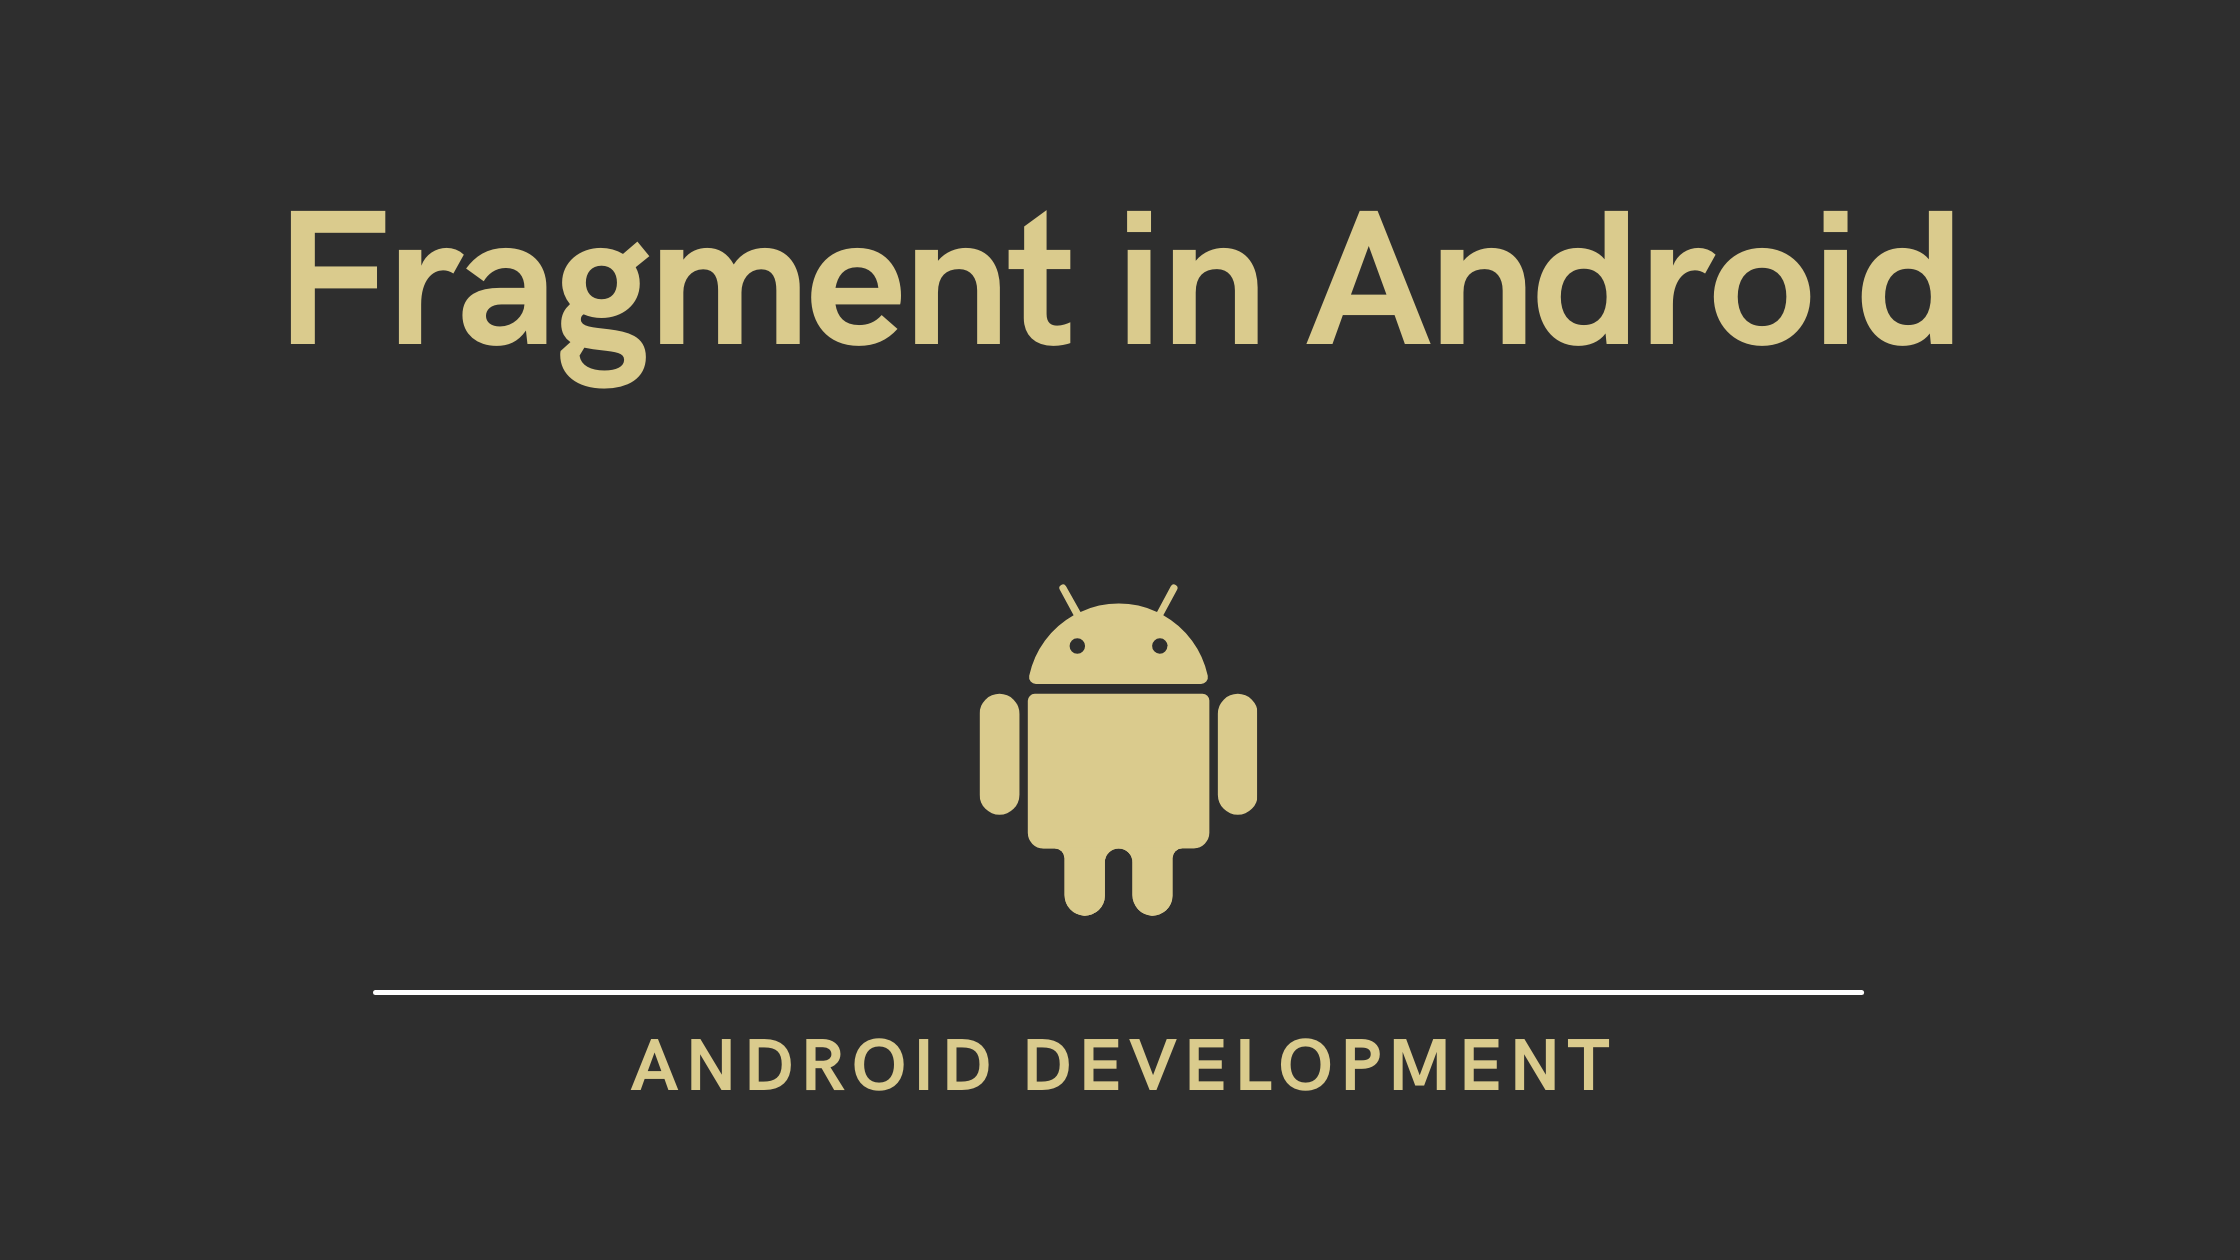 Fragment in Android